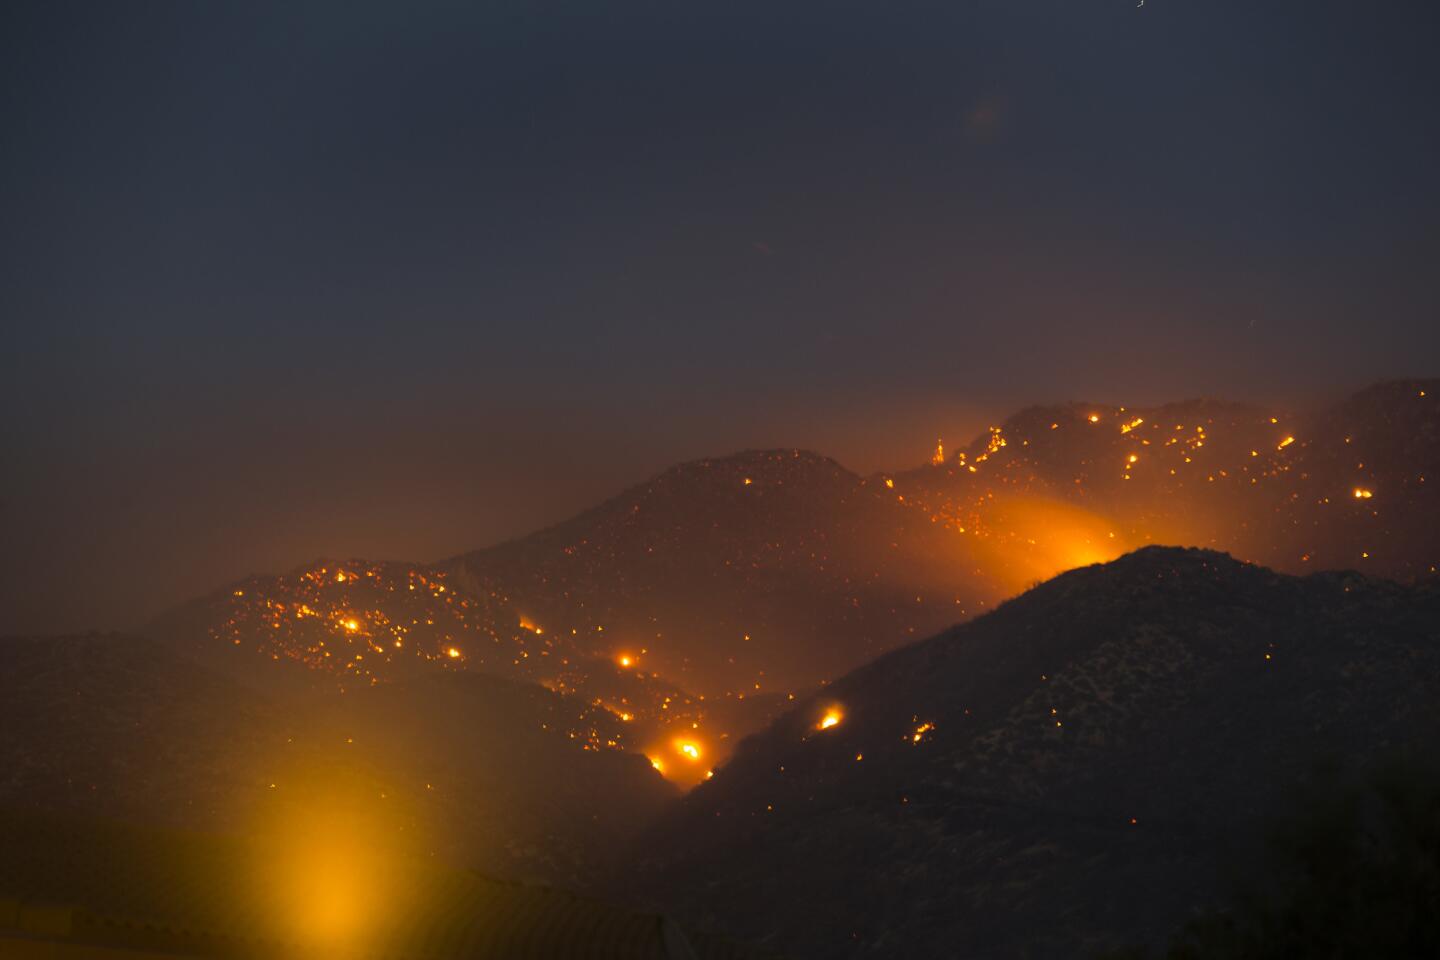 A long camera exposure captures the burning embers of the Pilot fire in mountainous terrain southeast of Hesperia in Summit Valley.